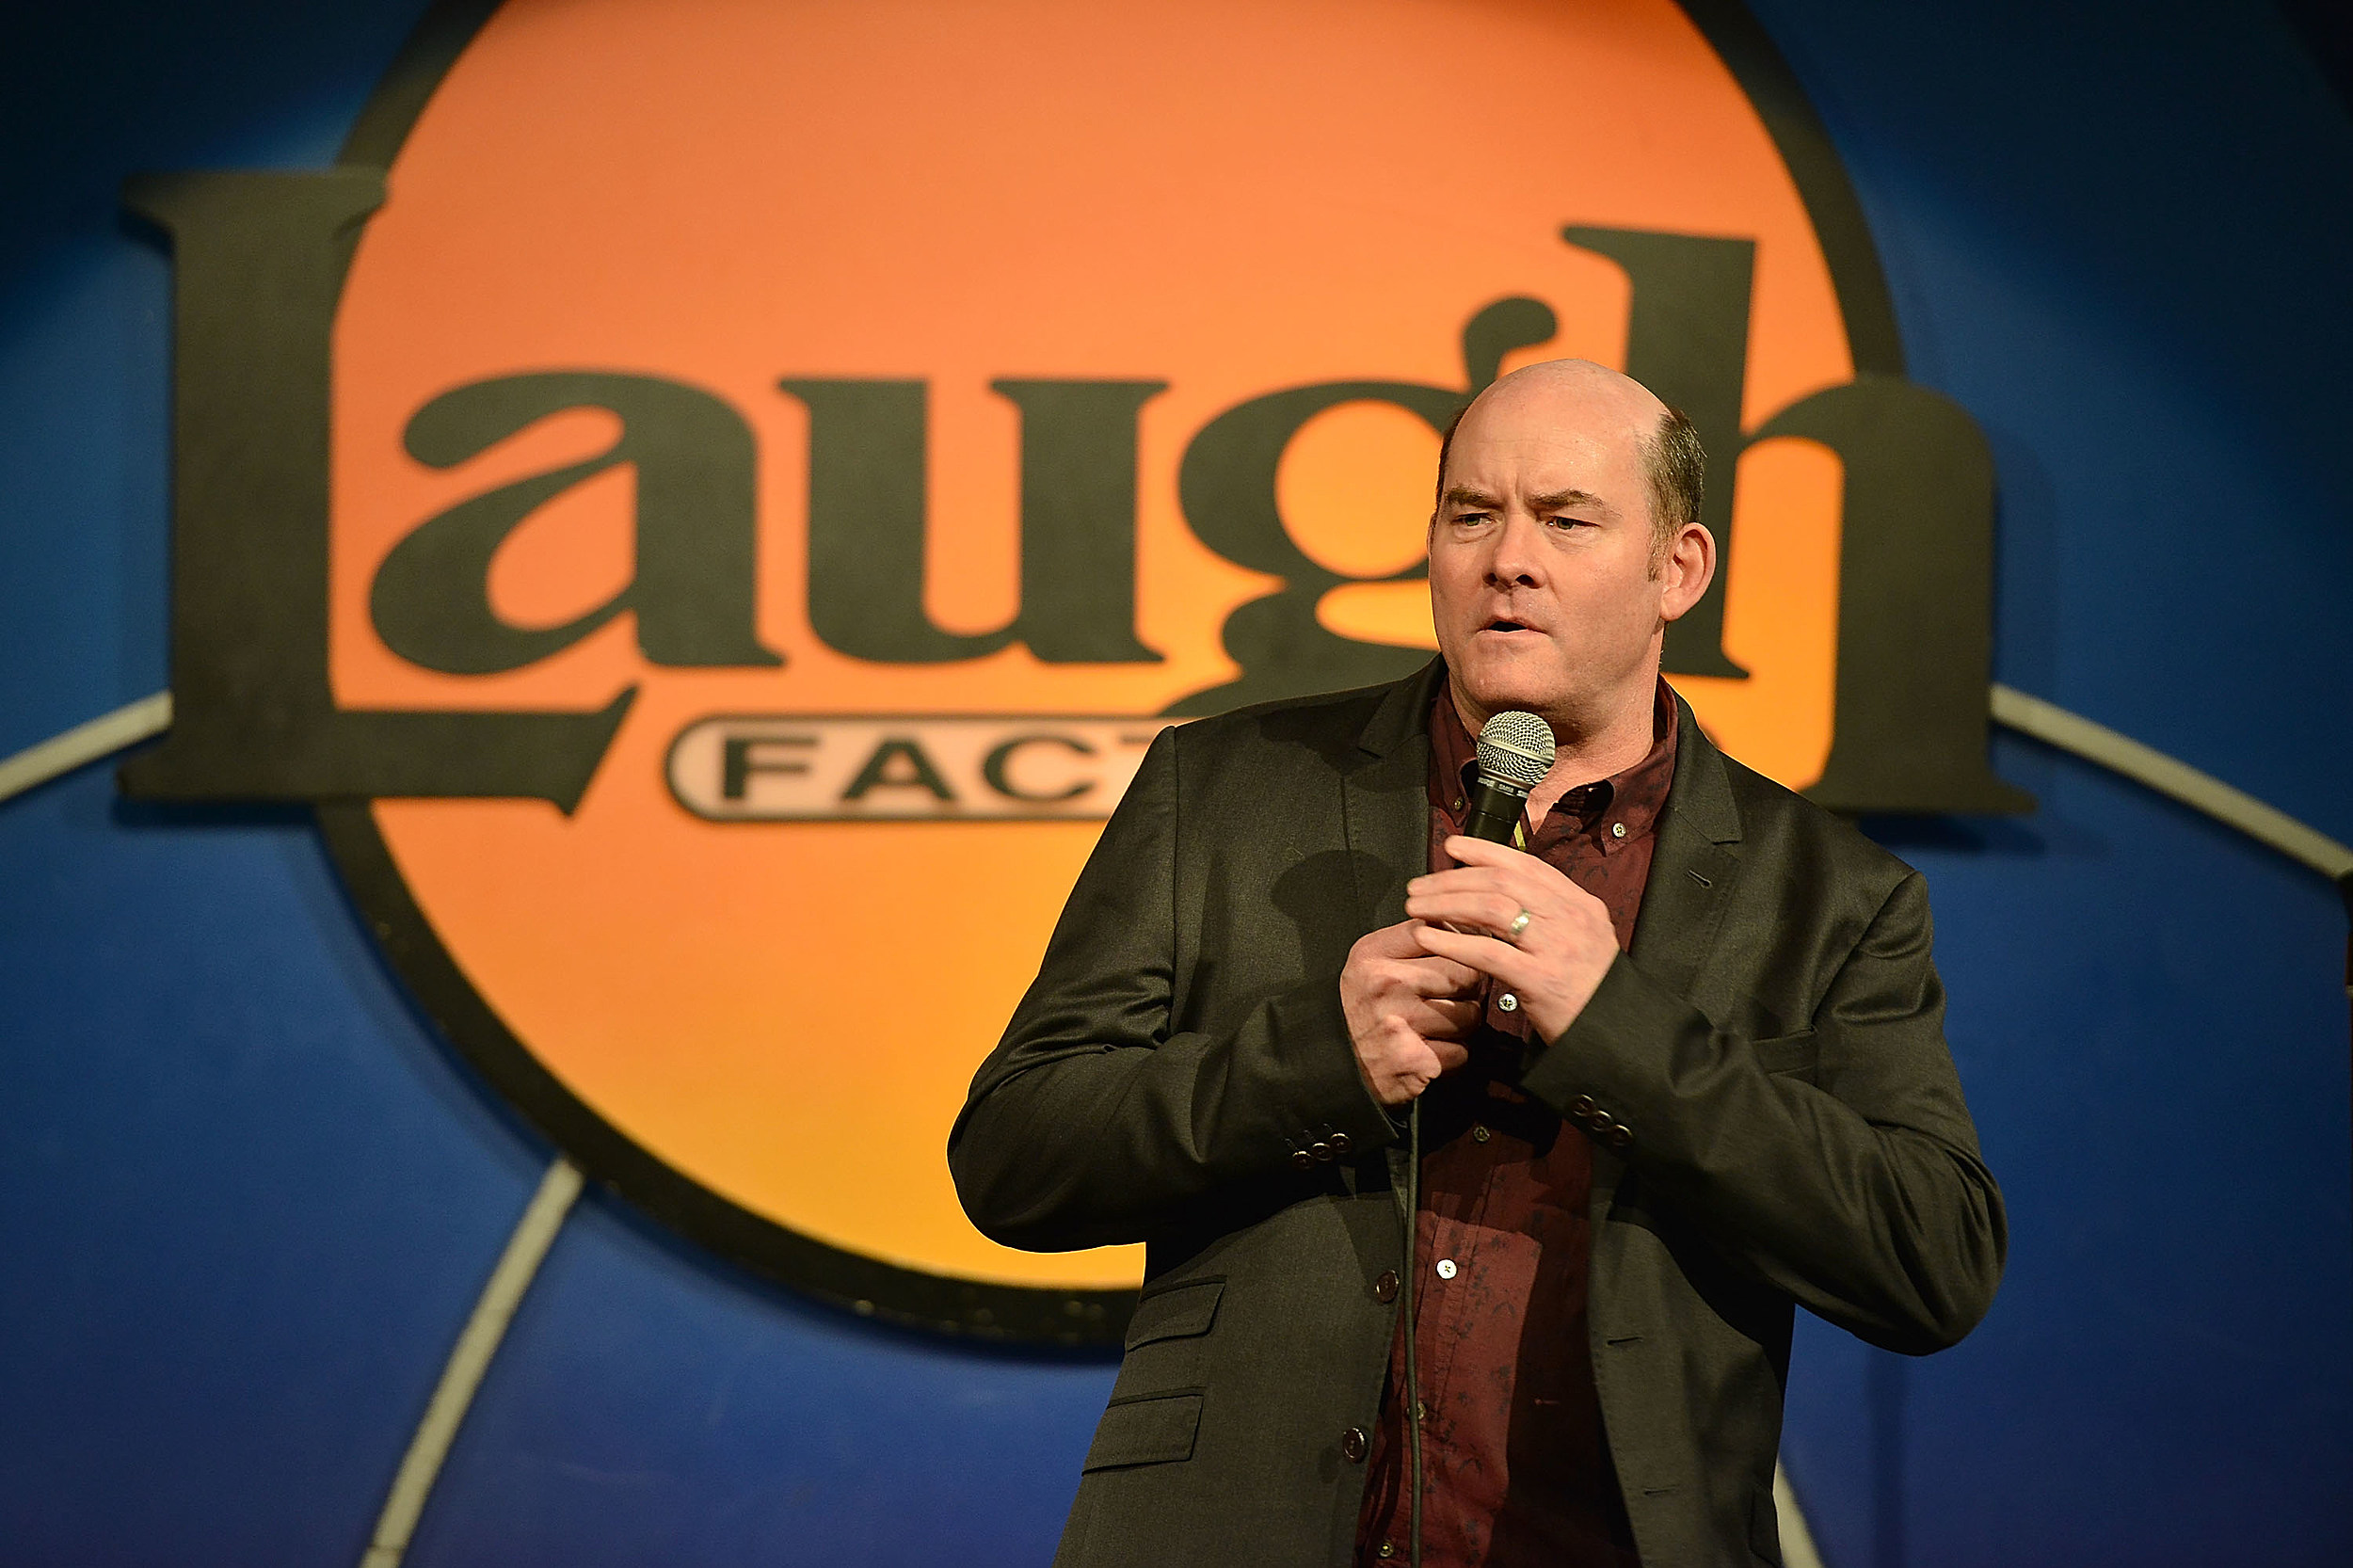 David Koechner Emcees 11th Annual COMEDY FOR A CAUSE Benefiting The Hollywood Wilshire YMCA